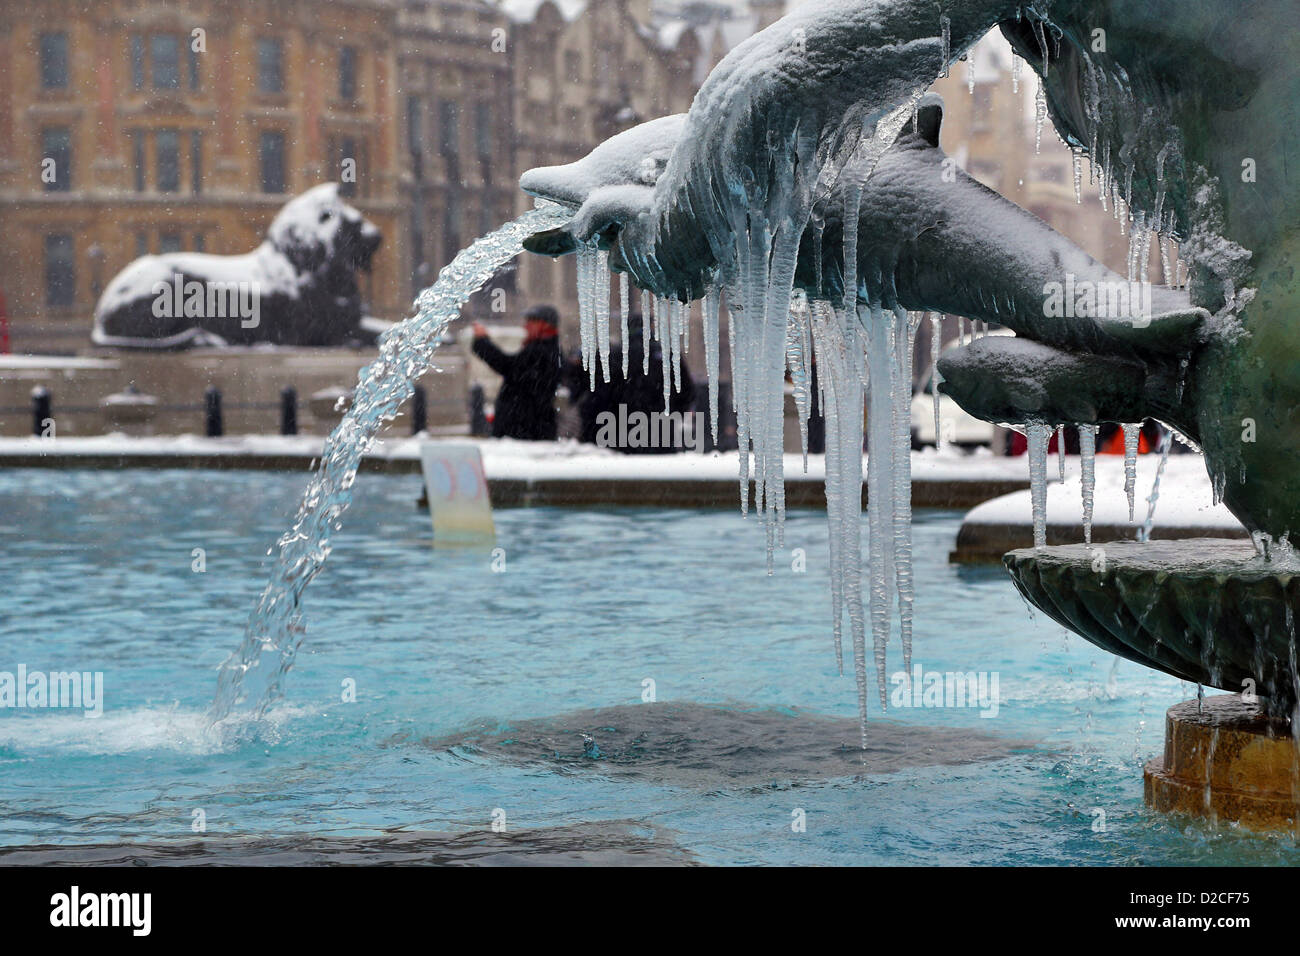 London, UK. 20th January 2013. Snow and ice on frozen fountains in Trafalgar Square, London, England. Alamy Live News Stock Photo